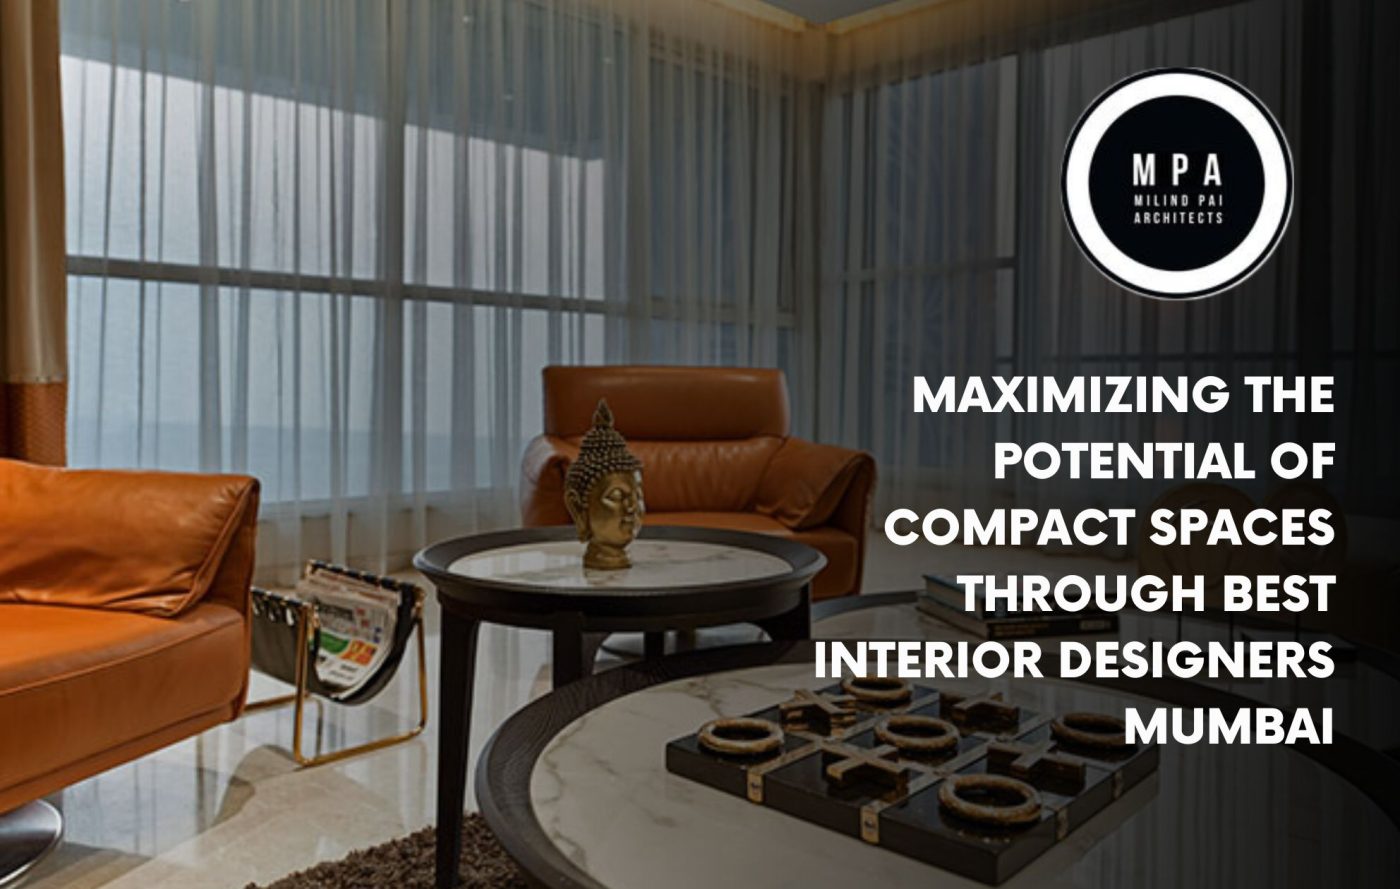 Maximizing the potential of compact spaces through clever Best Interior Designers Mumbai